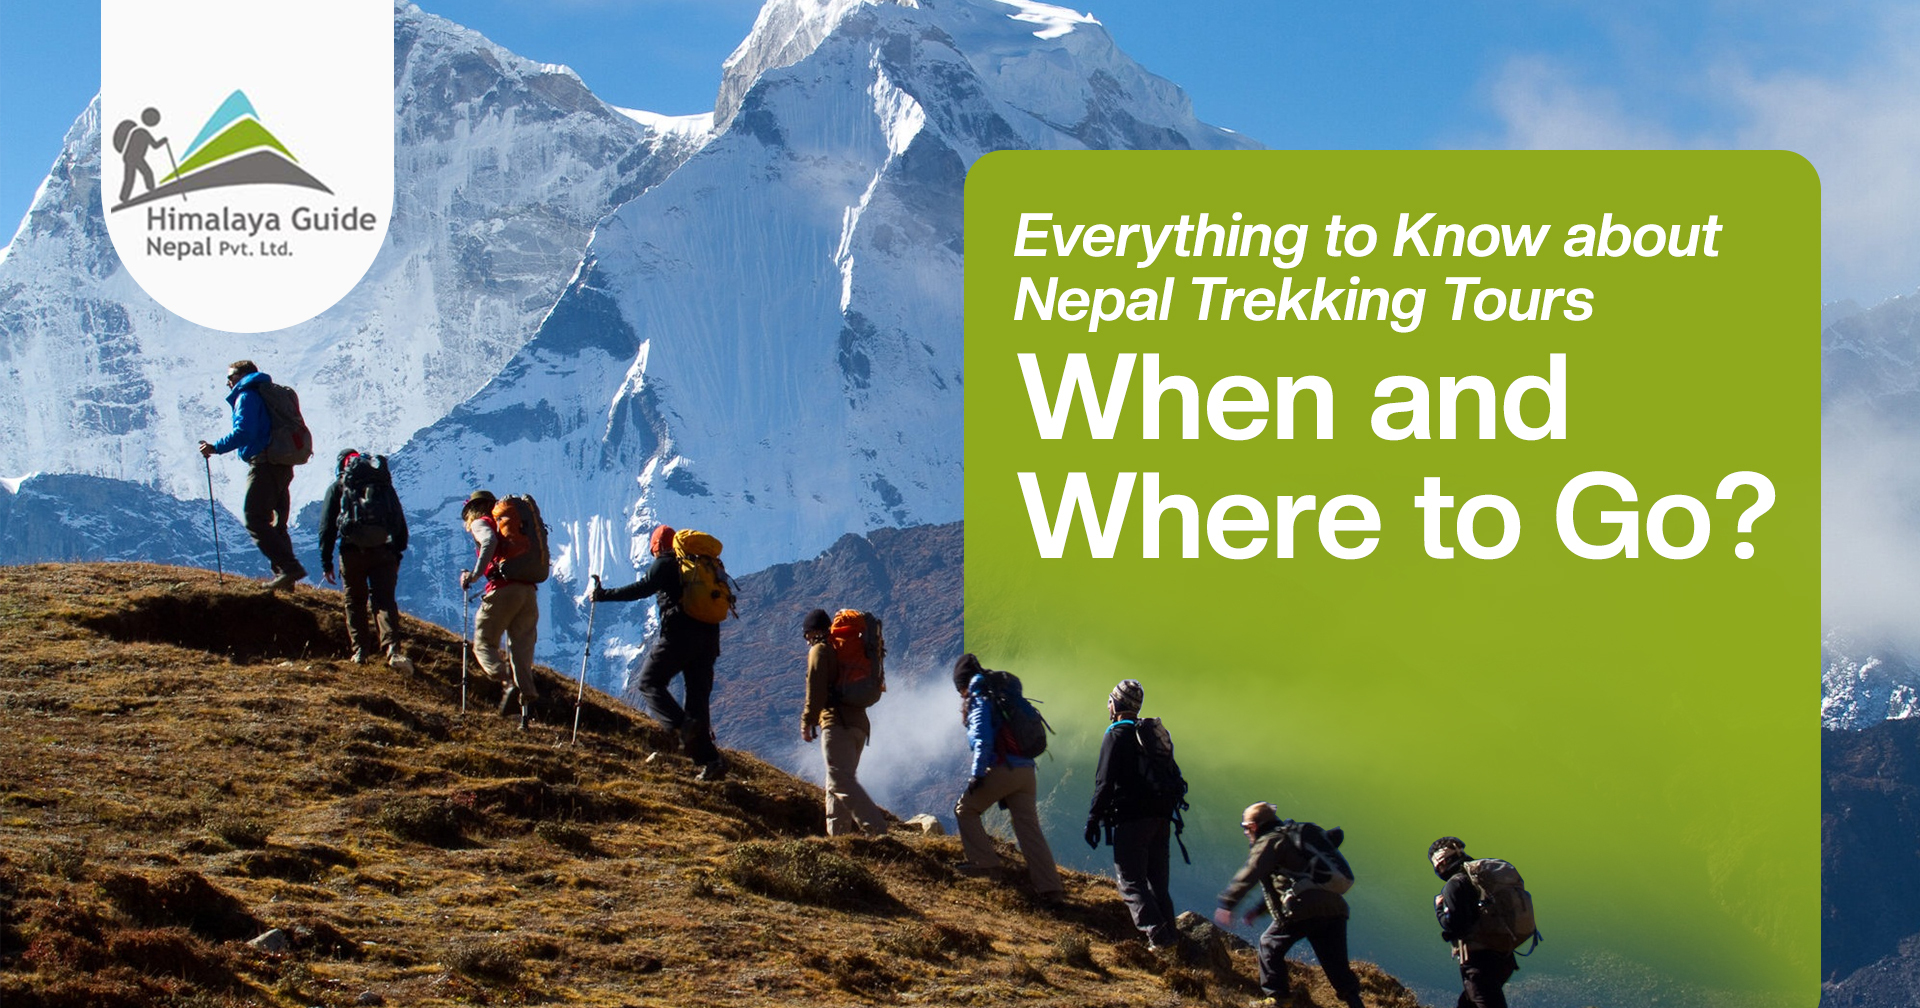 Everything to Know about Nepal Trekking Tours: When and Where to Go